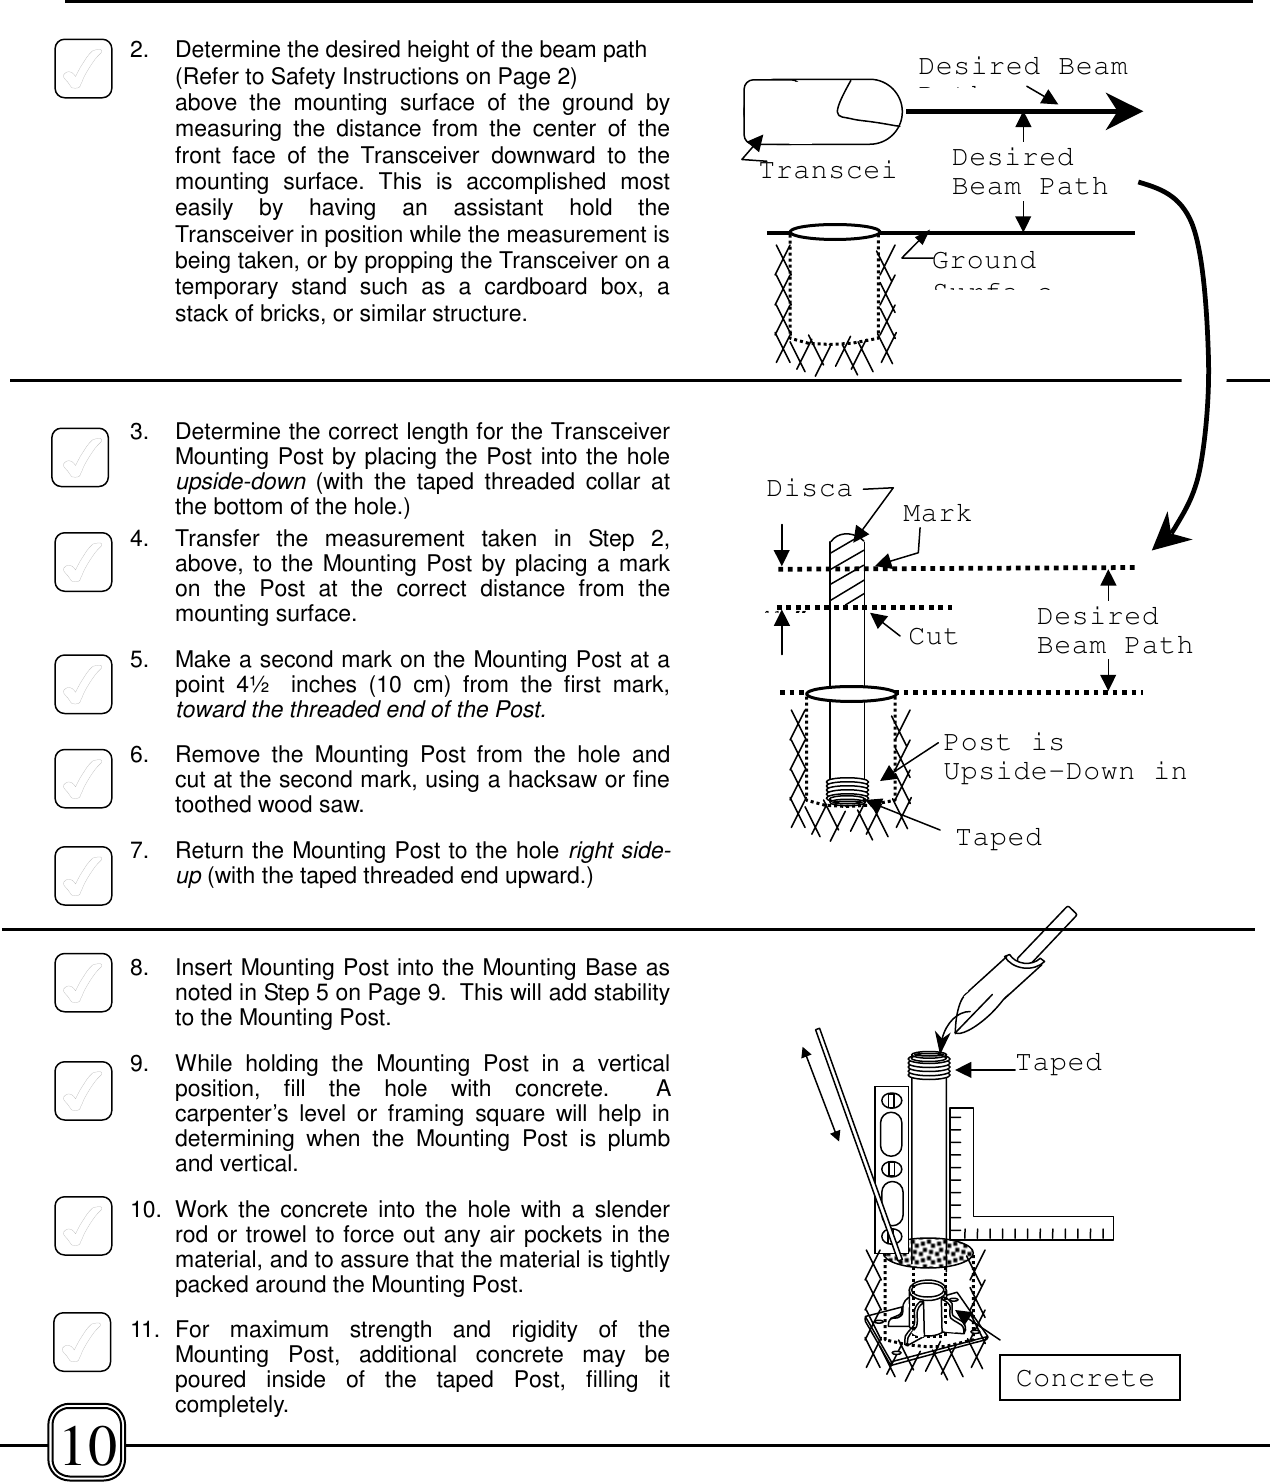 2. Determine the desired height of the beam path(Refer to Safety Instructions on Page 2)above the mounting surface of the ground bymeasuring the distance from the center of thefront face of the Transceiver downward to themounting surface. This is accomplished mosteasily by having an assistant hold theTransceiver in position while the measurement isbeing taken, or by propping the Transceiver on atemporary stand such as a cardboard box, astack of bricks, or similar structure.3. Determine the correct length for the TransceiverMounting Post by placing the Post into the holeupside-down (with the taped threaded collar atthe bottom of the hole.)4. Transfer the measurement taken in Step 2,above, to the Mounting Post by placing a markon the Post at the correct distance from themounting surface.5. Make a second mark on the Mounting Post at apoint 4½  inches (10 cm) from the first mark,toward the threaded end of the Post.6. Remove the Mounting Post from the hole andcut at the second mark, using a hacksaw or finetoothed wood saw.7. Return the Mounting Post to the hole right side-up (with the taped threaded end upward.)8. Insert Mounting Post into the Mounting Base asnoted in Step 5 on Page 9.  This will add stabilityto the Mounting Post.9.  While holding the Mounting Post in a verticalposition, fill the hole with concrete.  Acarpenter’s level or framing square will help indetermining when the Mounting Post is plumband vertical.10. Work the concrete into the hole with a slenderrod or trowel to force out any air pockets in thematerial, and to assure that the material is tightlypacked around the Mounting Post.11. For maximum strength and rigidity of theMounting Post, additional concrete may bepoured inside of the taped Post, filling itcompletely.Post isUpside-Down in4½”DiscaDesiredBeam PathMarkCutDesired BeamPthTransceiGroundSurfa eDesiredBeam PathTapedConcrete10Taped